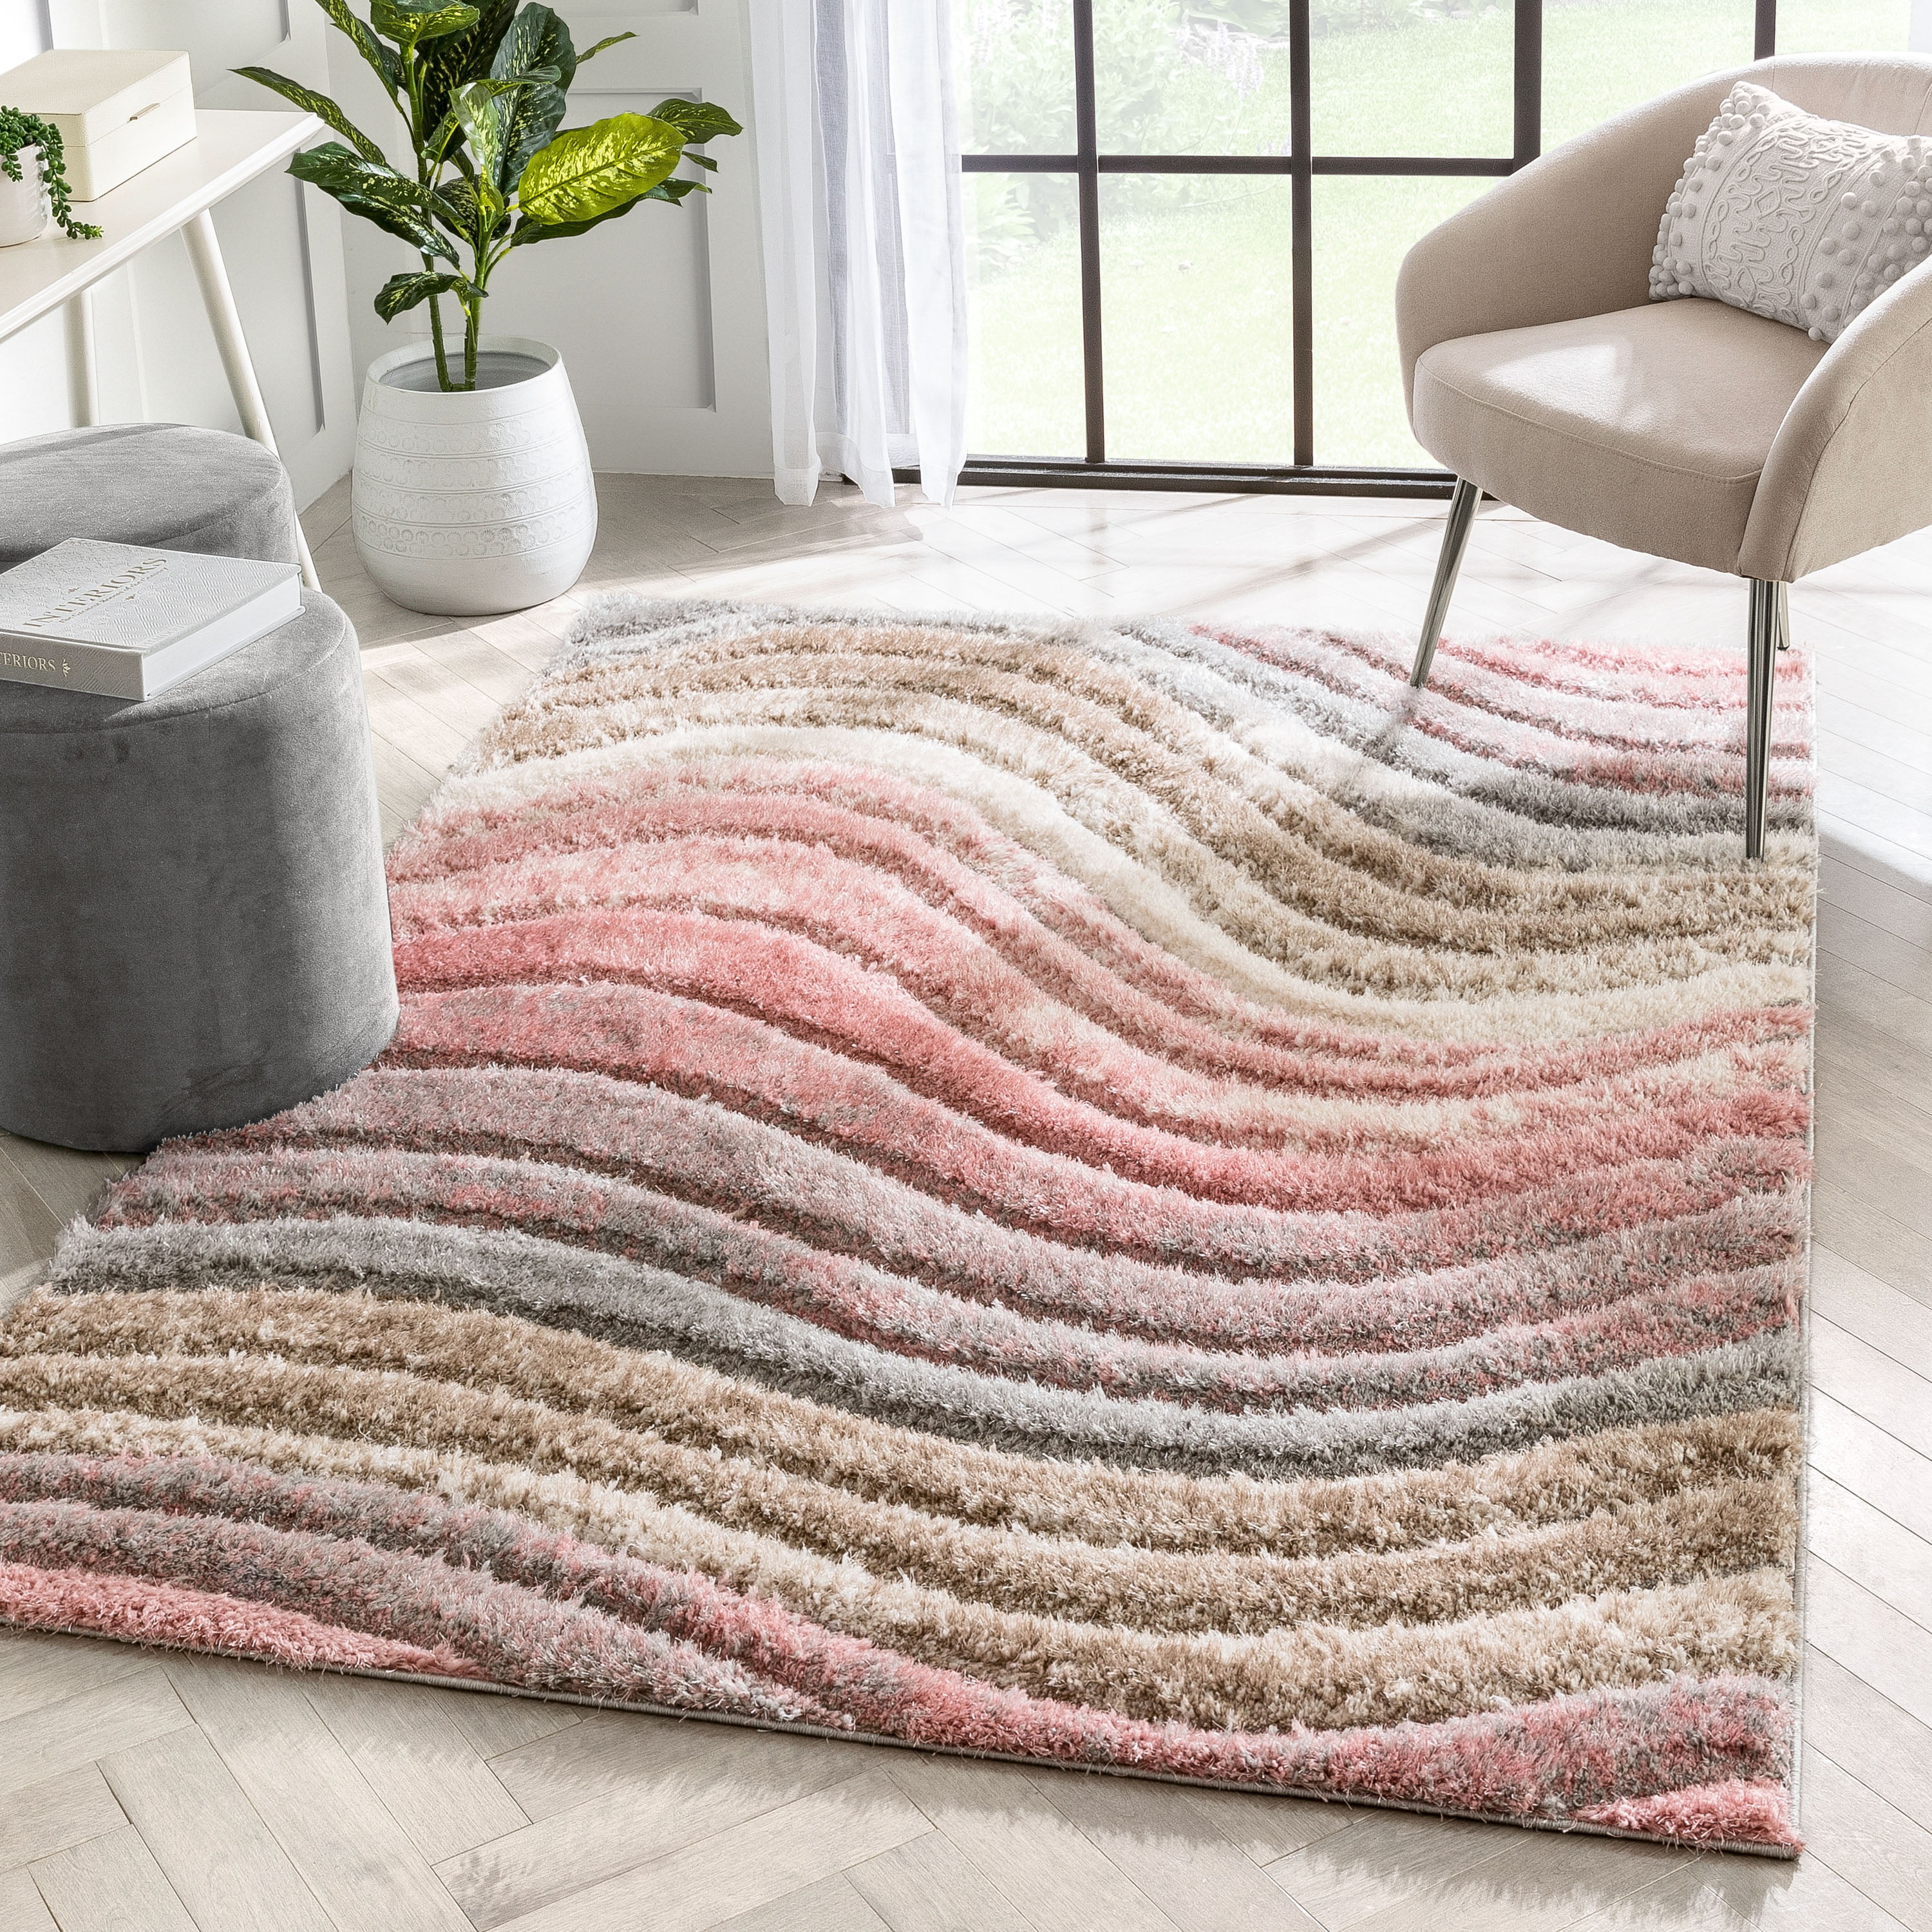 Blush Pink Textured Living Room Rugs Soft Geometric Bedroom Rugs Small Large Rug 